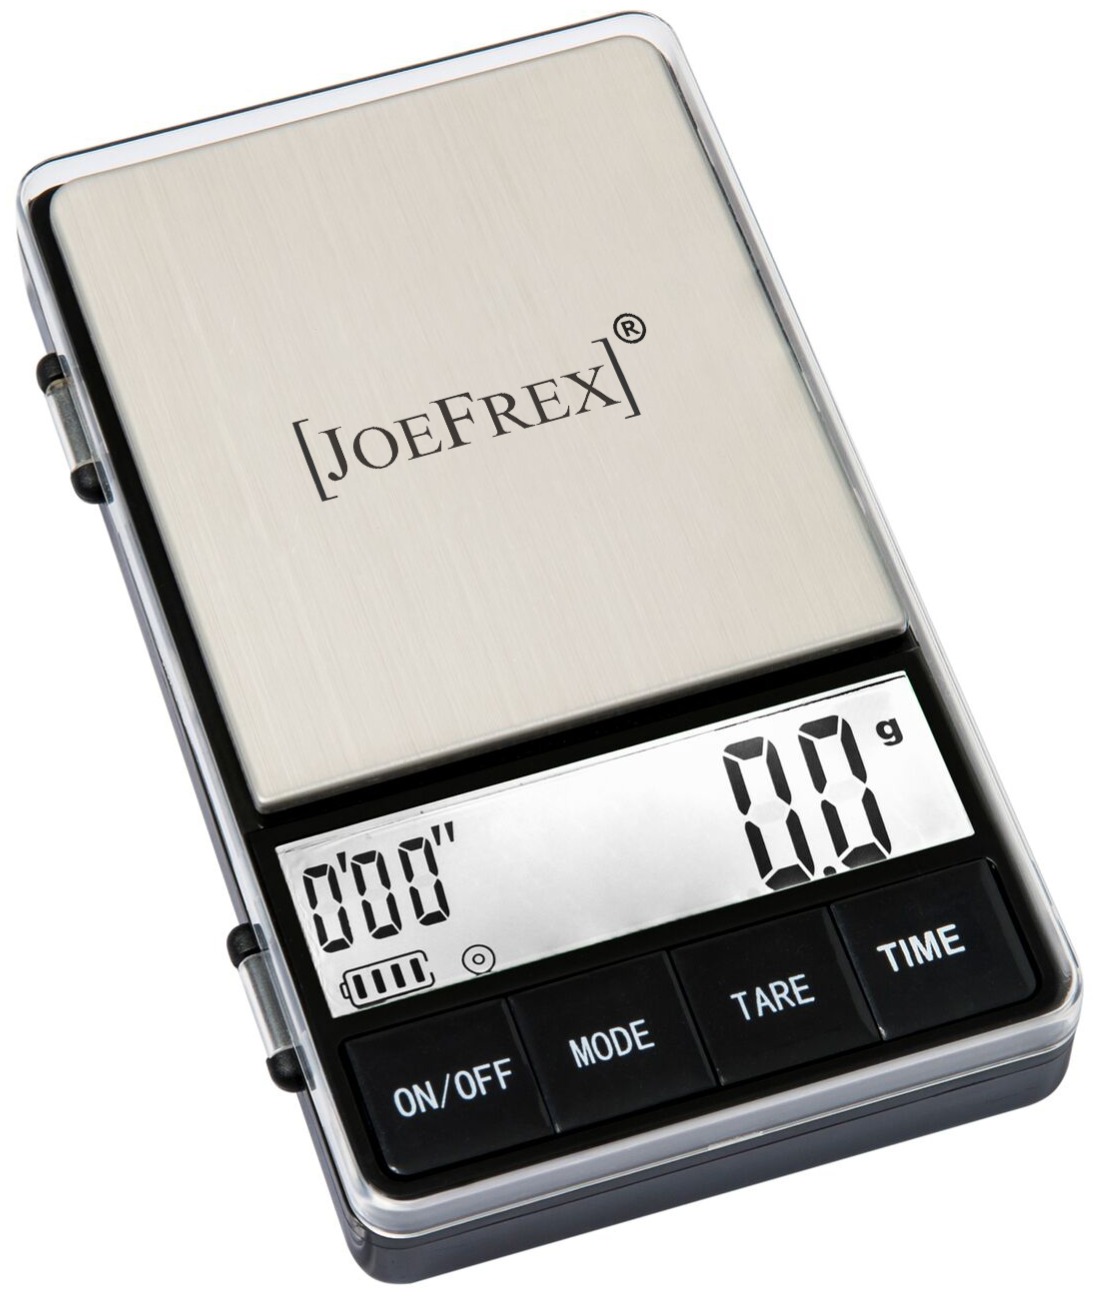 https://www.cremashop.se/content/products/joefrex/digital-coffee-scale-with-timer/3492.jpg